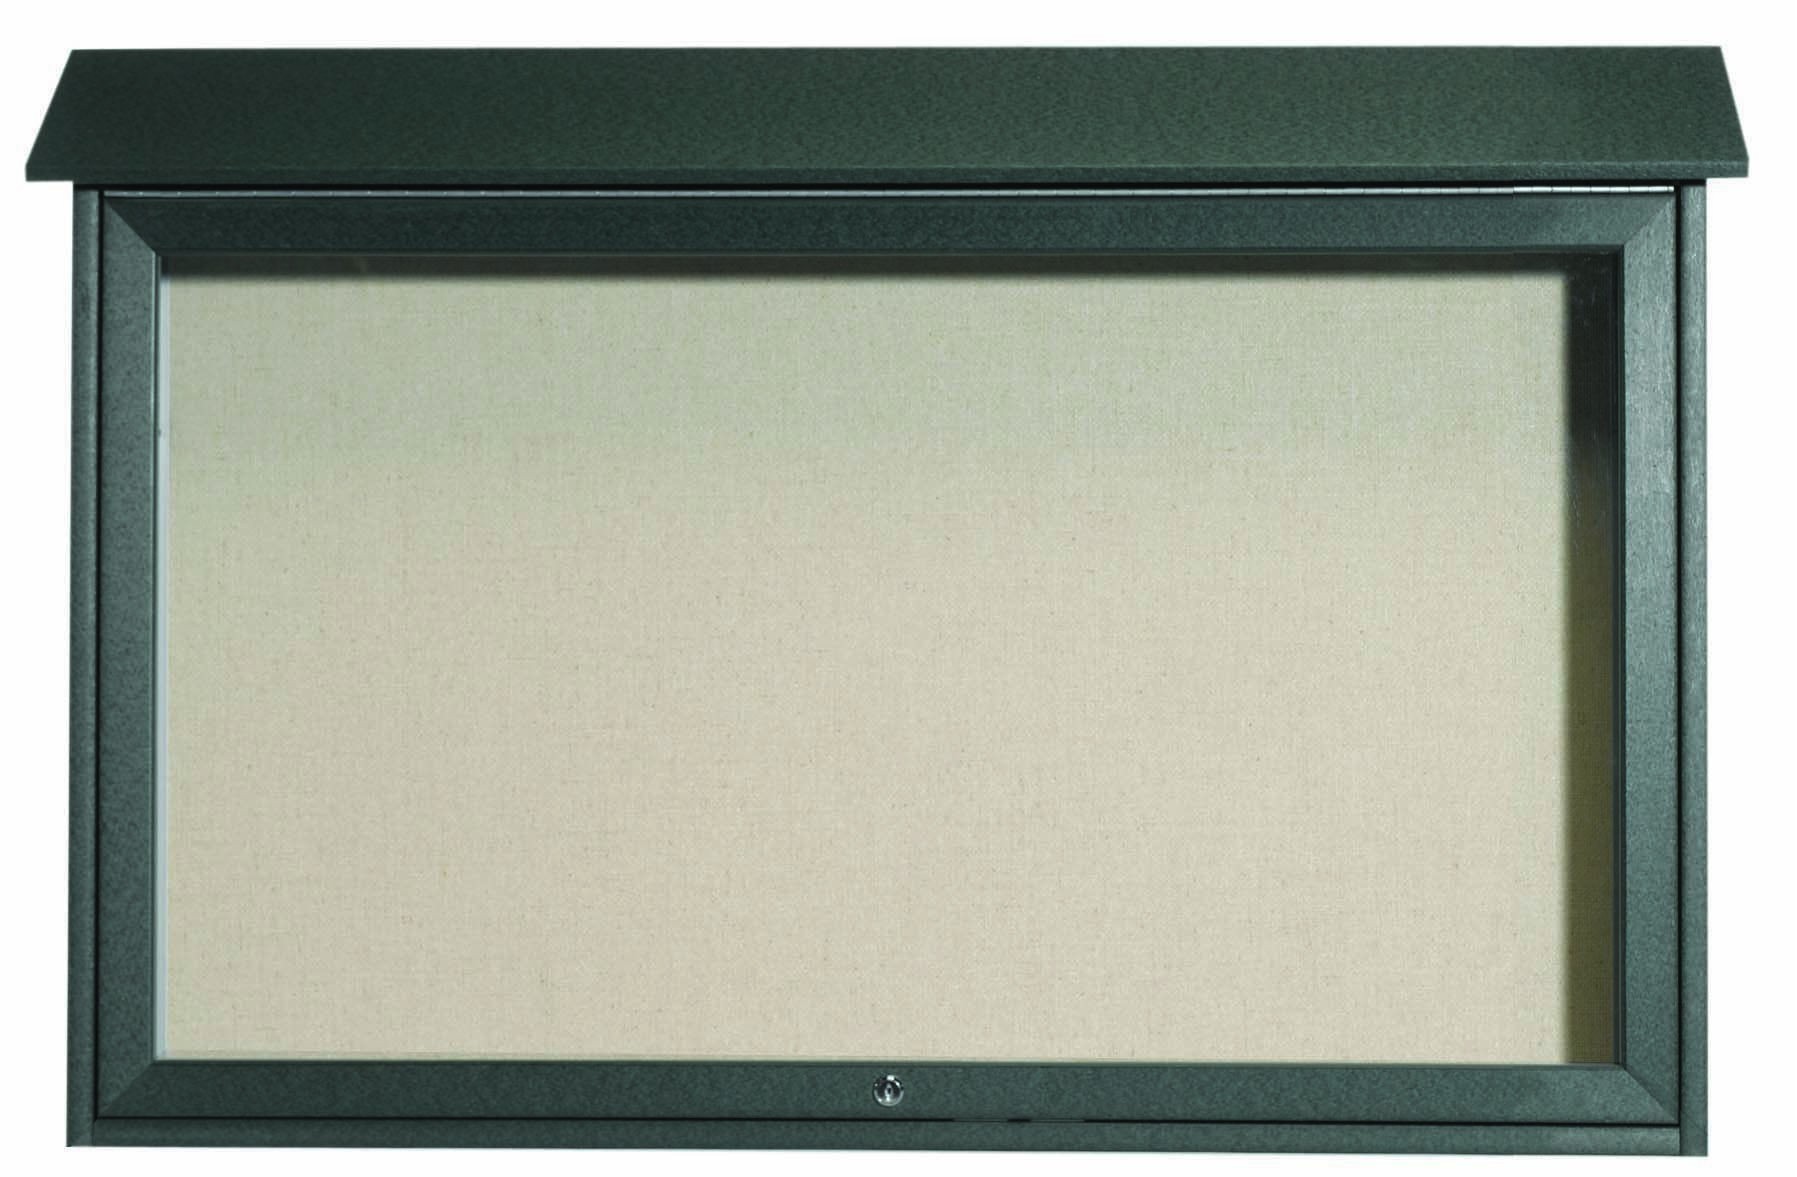 Aarco Products PLD3045T-4 Green Top Hinged Single Door Plastic Lumber Message Center with Vinyl Board, 45"W x 30"H